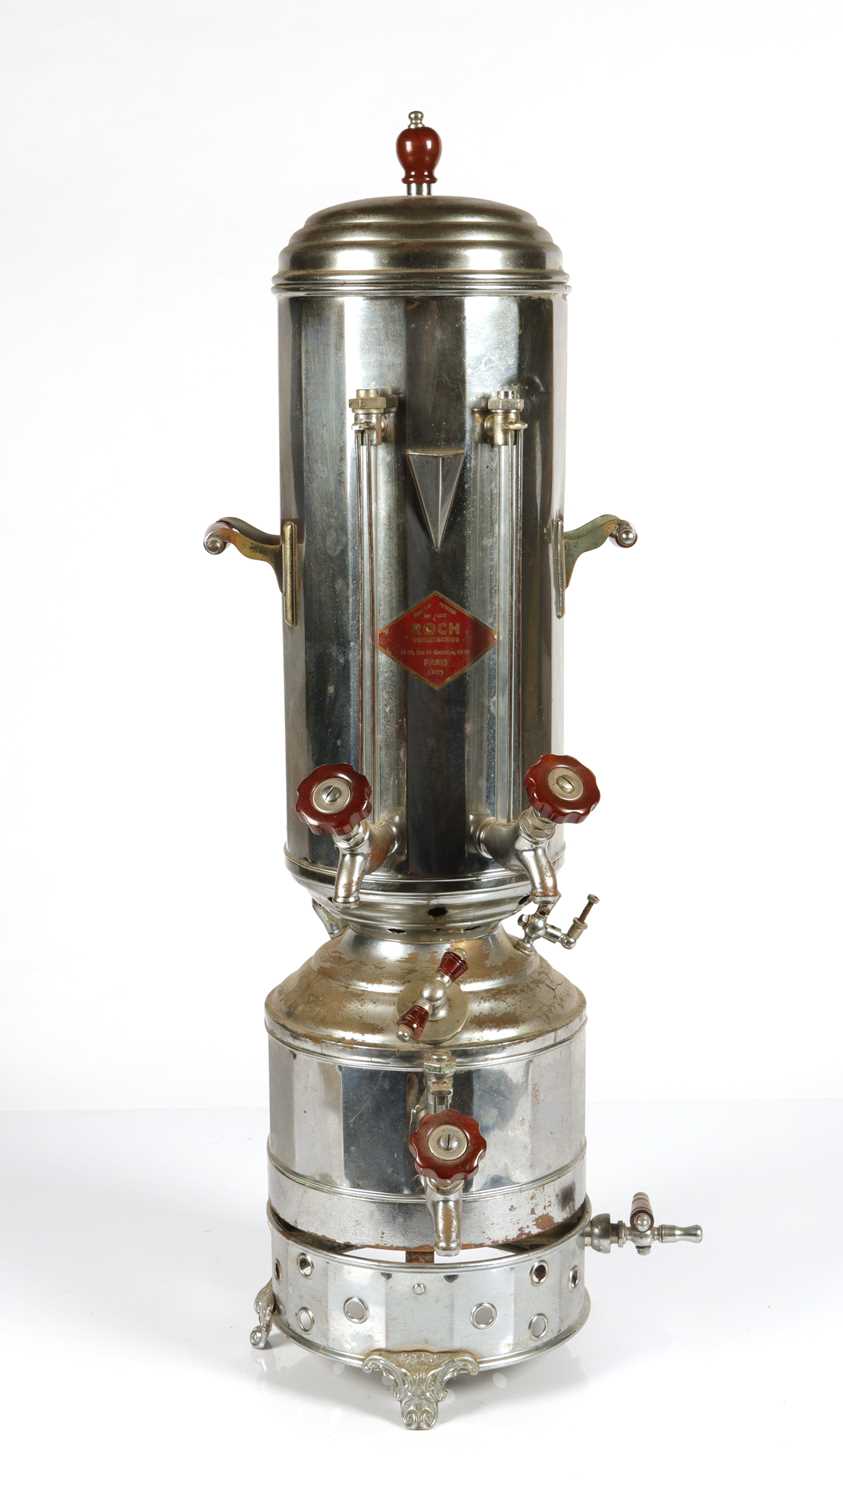 Lot 456 - A French ROCH Coffee Percolator with Gas Burner, dated 1908.